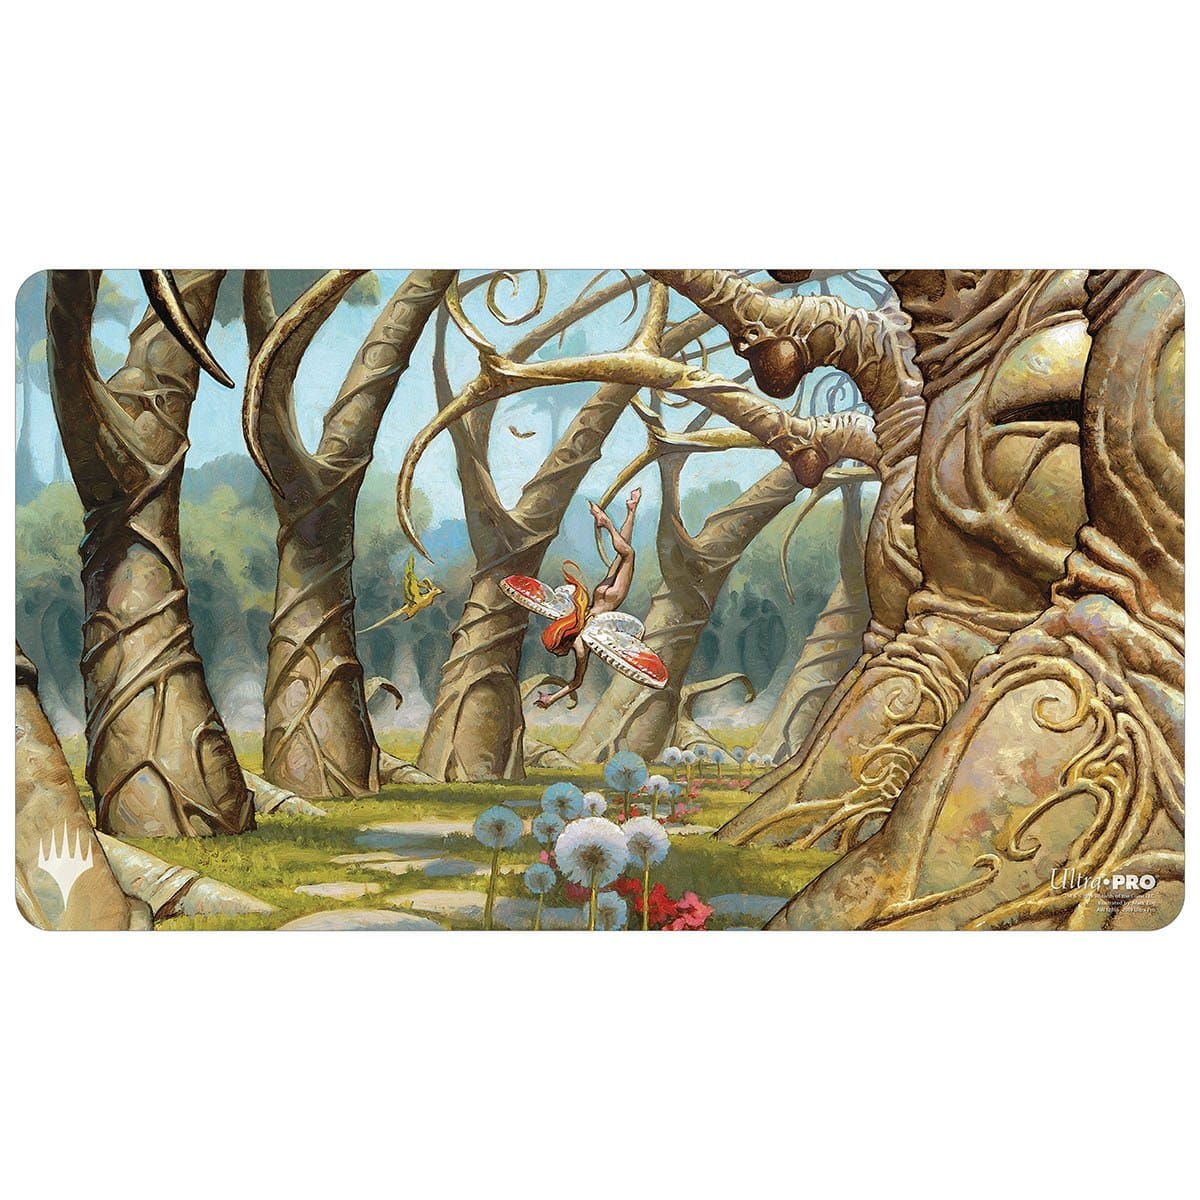 Gaea&#39;s Cradle Playmat - Playmat - Original Magic Art - Accessories for Magic the Gathering and other card games